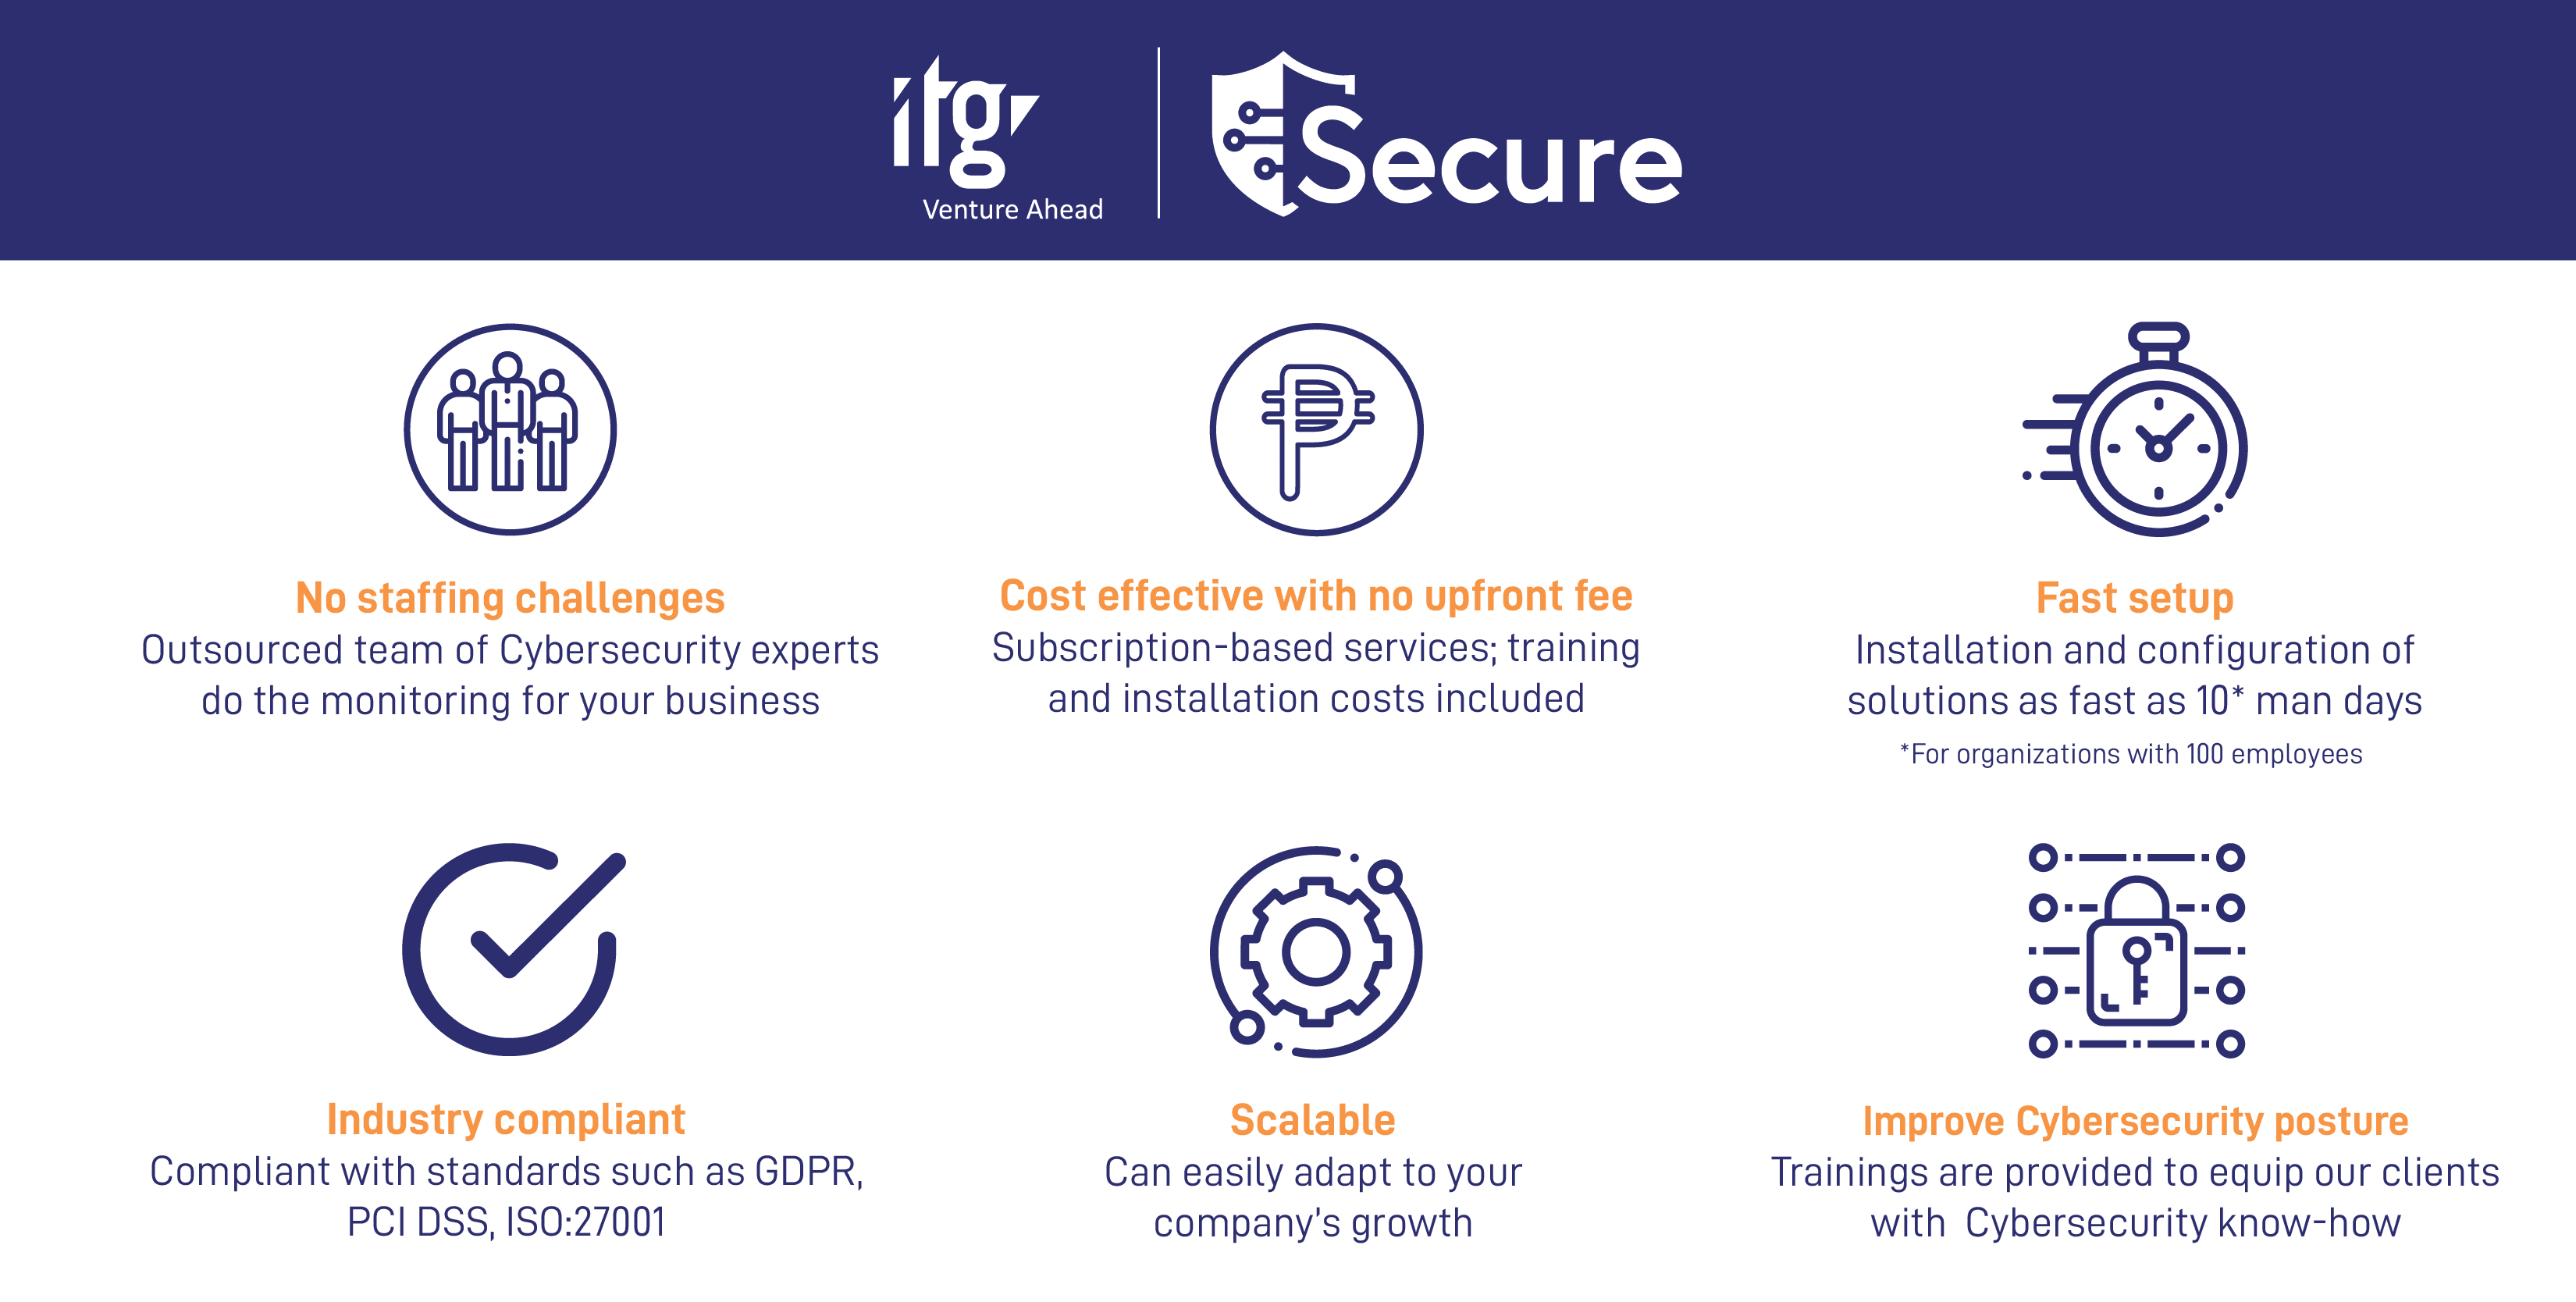 itg-secure-features